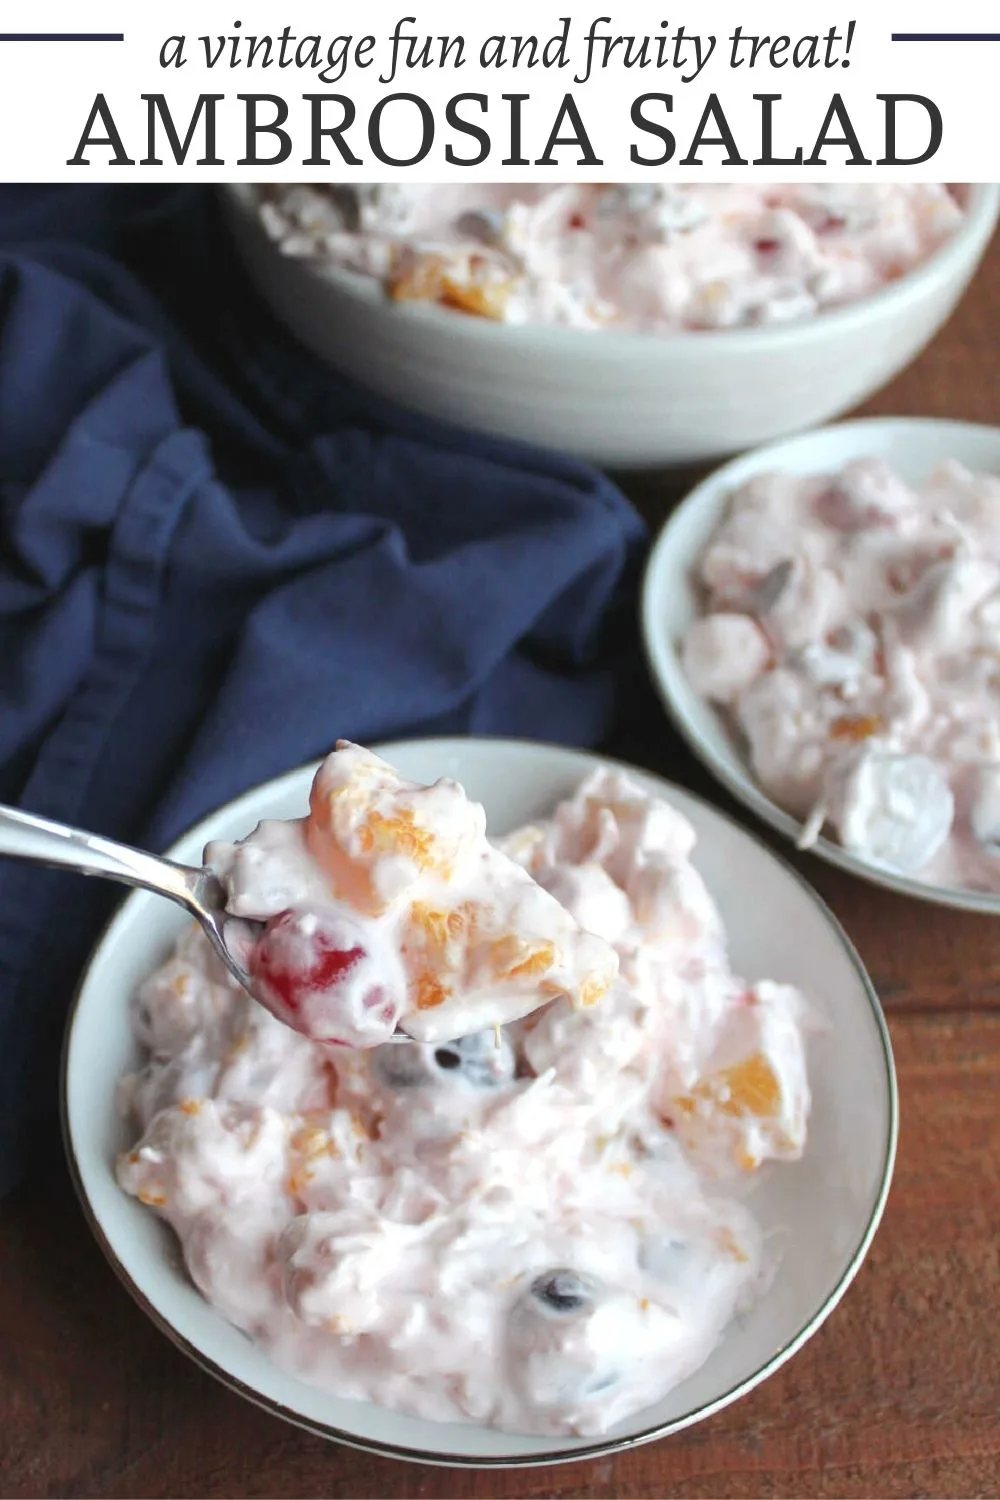 Ambrosia fruit salad is the perfect mix of pineapple, mandarin oranges, coconut, cherries, grapes, and marshmallows in a creamy dressing. It is a vintage classic for good reason. It's fruity, fun, and delicious! 